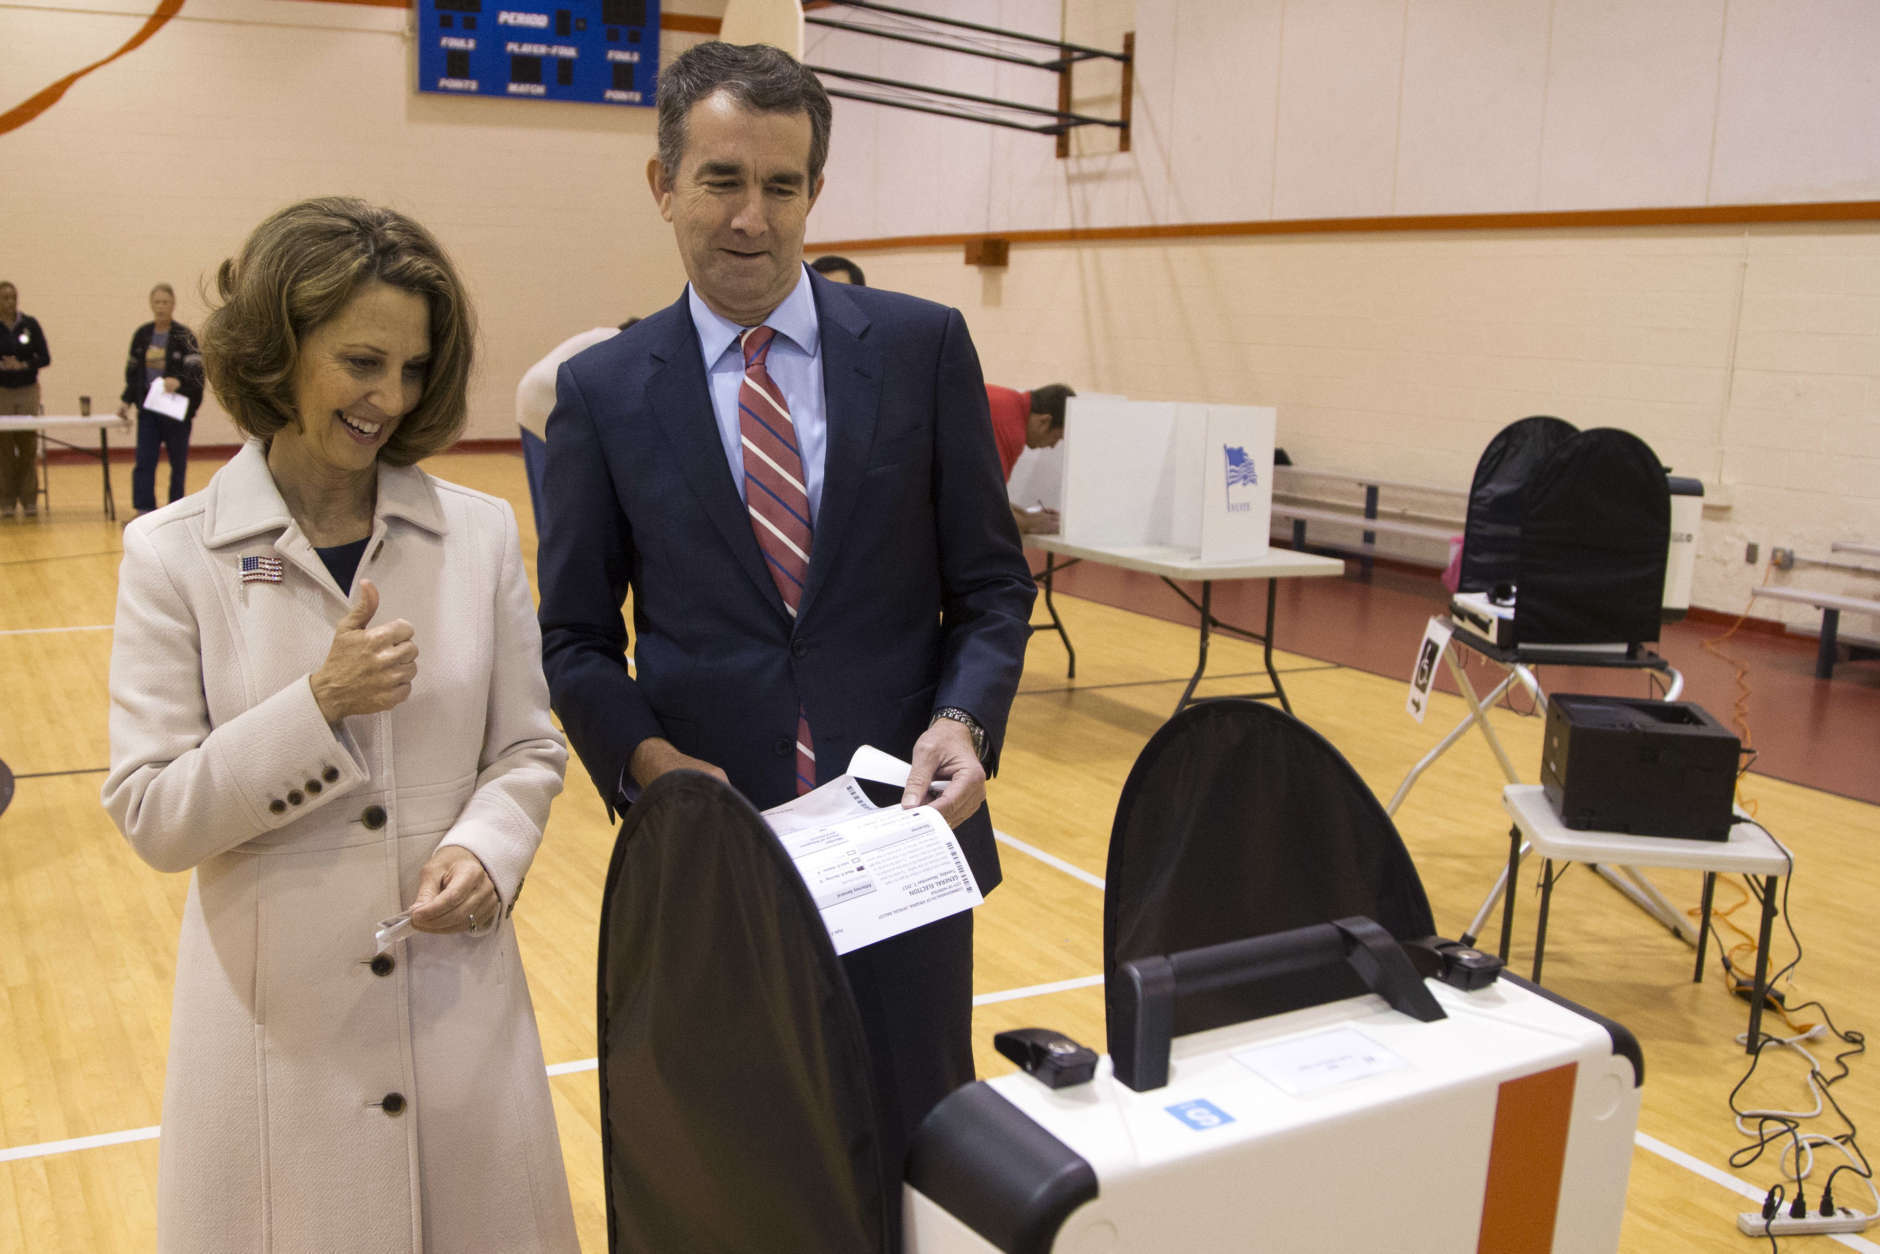 Democratic gubernatorial candidate Lt. Gov. Ralph Northam, and his wife, Pam, approach the vote tally machine as the vote in Norfolk, Va., Tuesday, Nov. 7, 2017. Northam faces Republican Ed Gillespie in today's election. (AP Photo/Steve Helber)